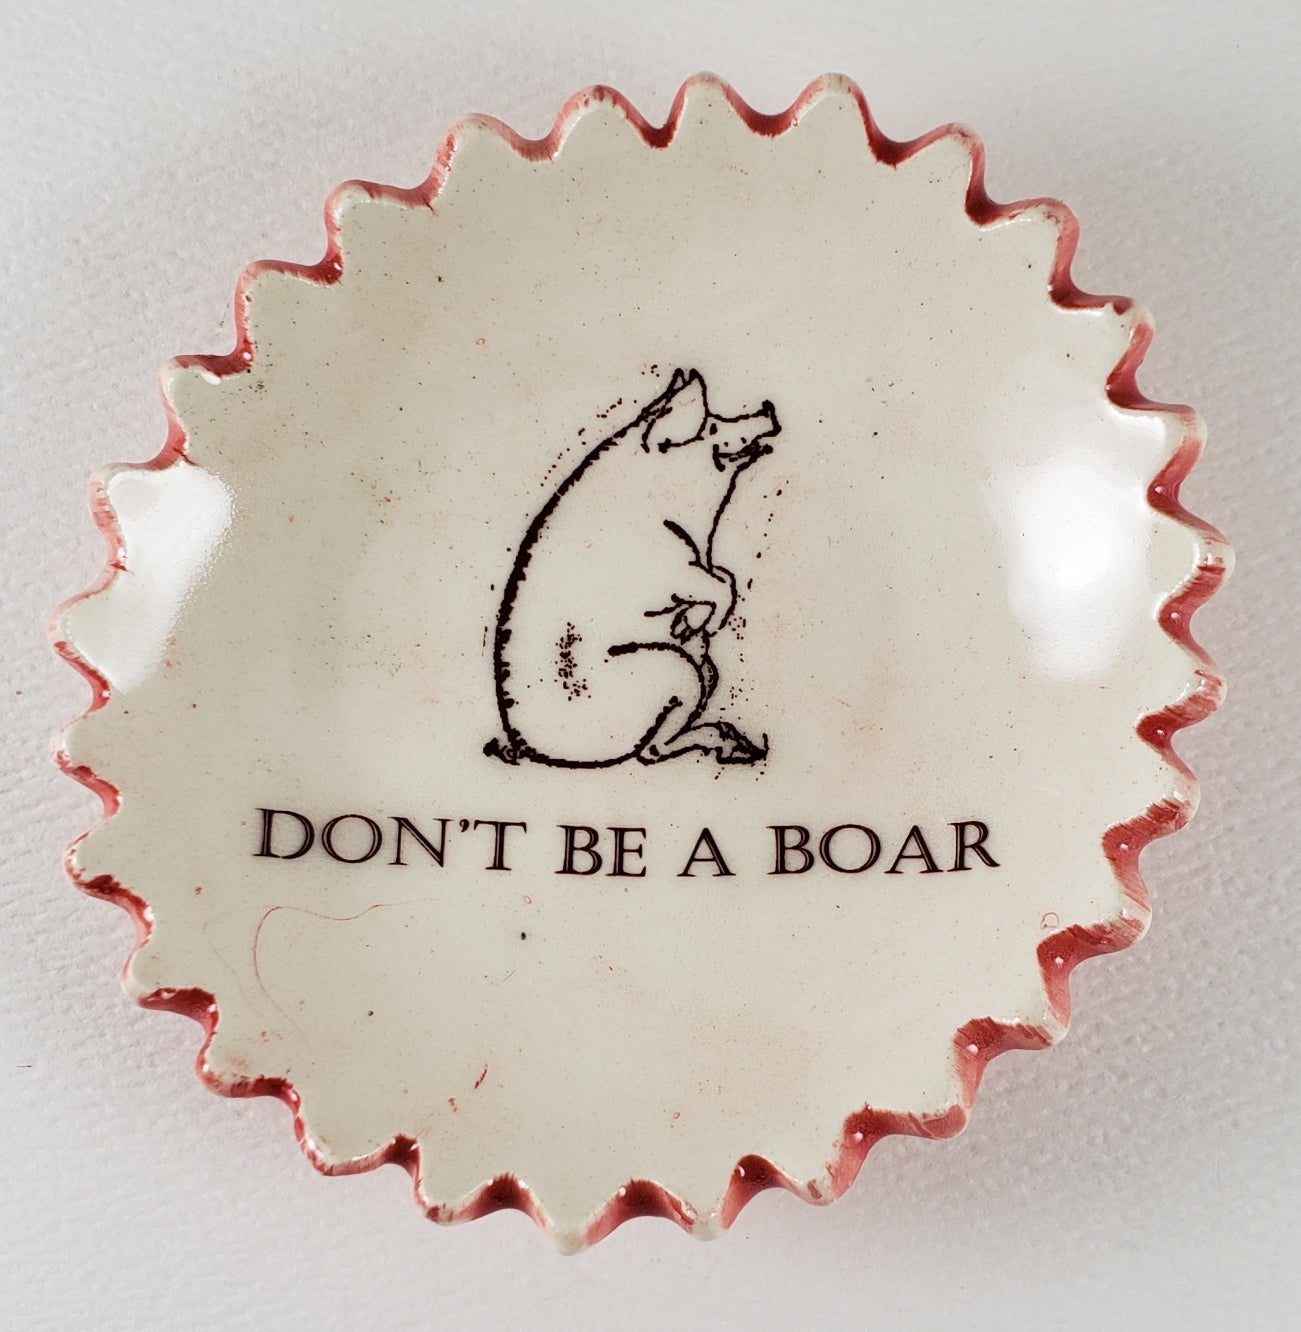 Tiny Plate with "Don't be a Boar"